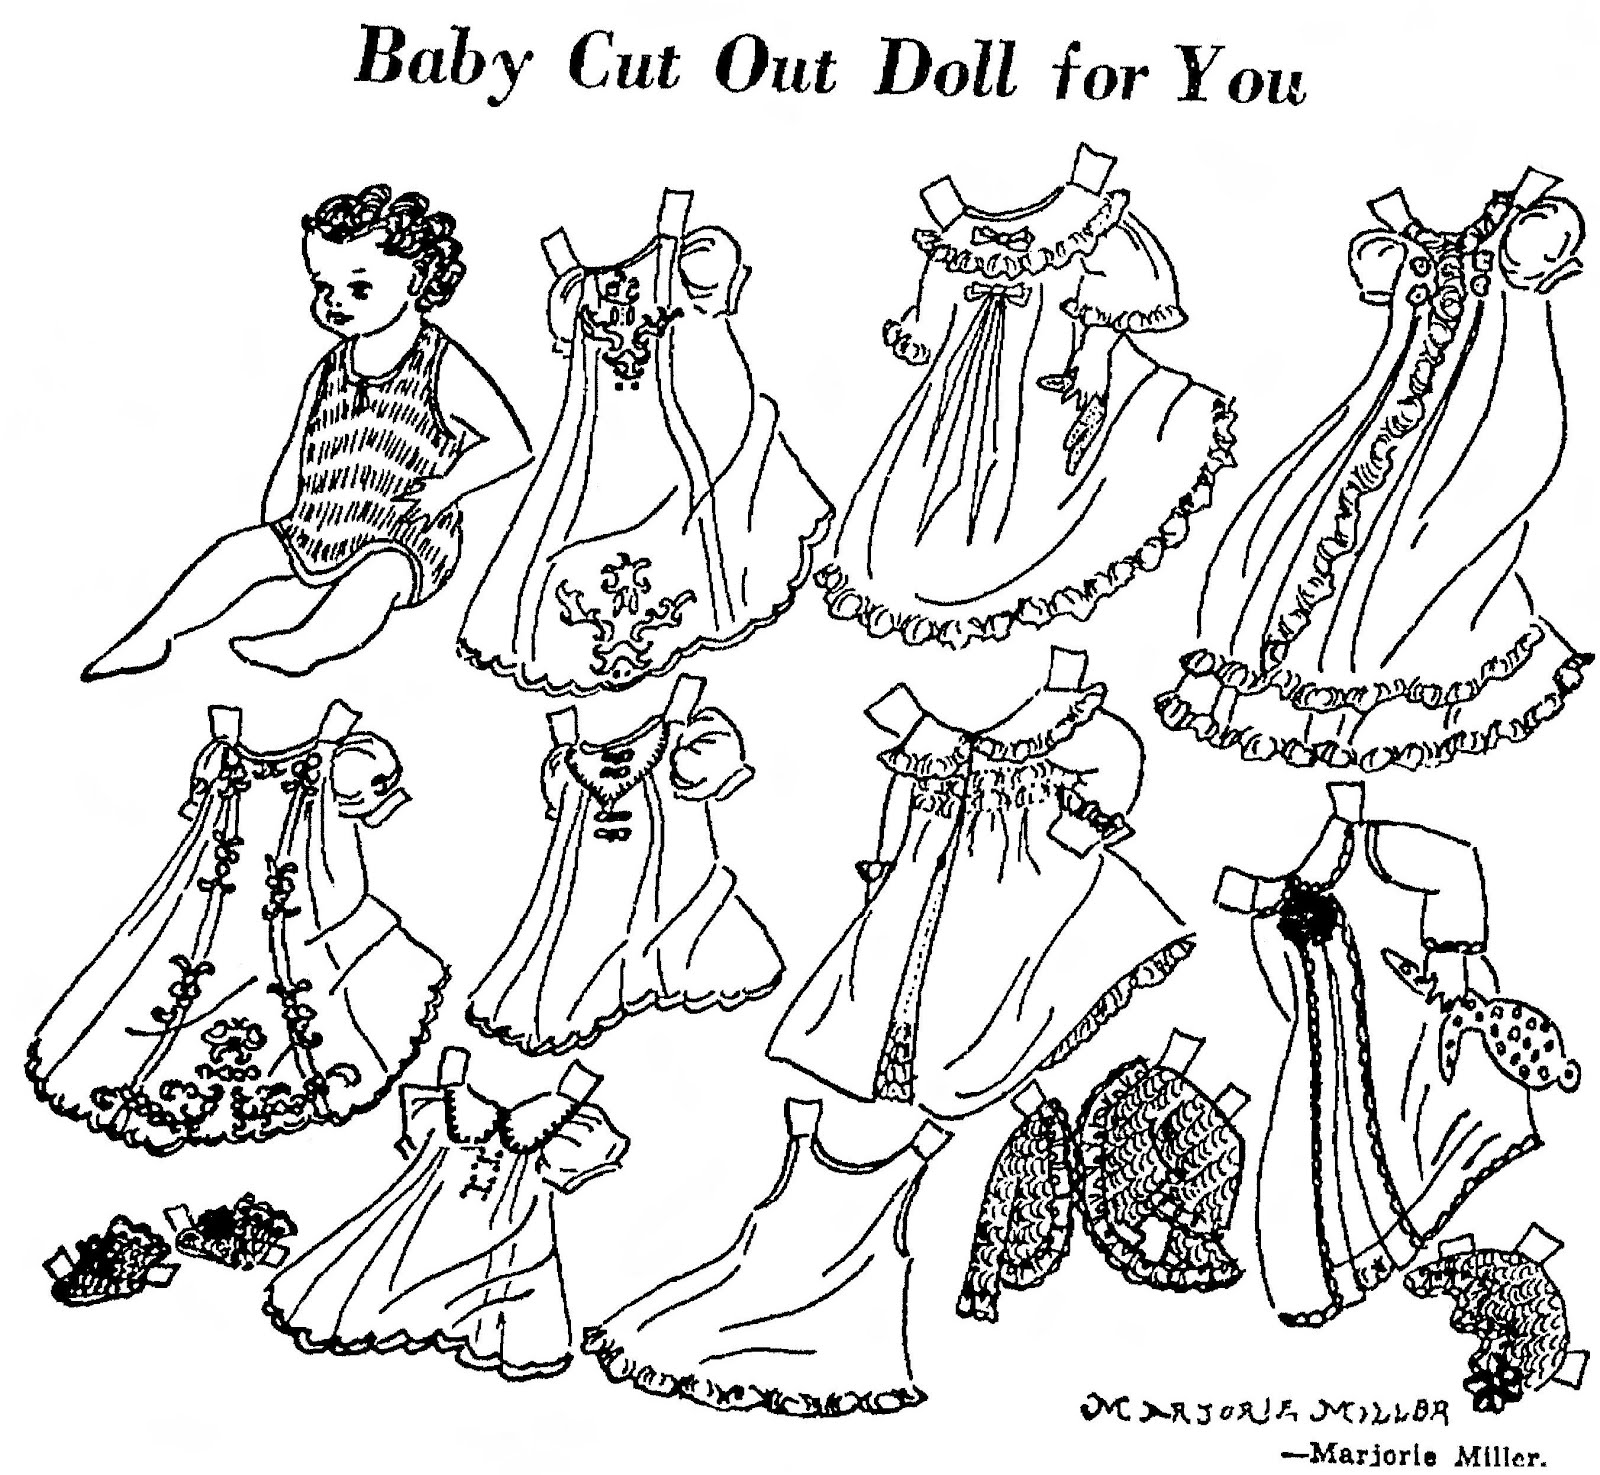 Paper Doll Cut Dolls 1937 Adult Pages Coloring November Adults Babies Colou...